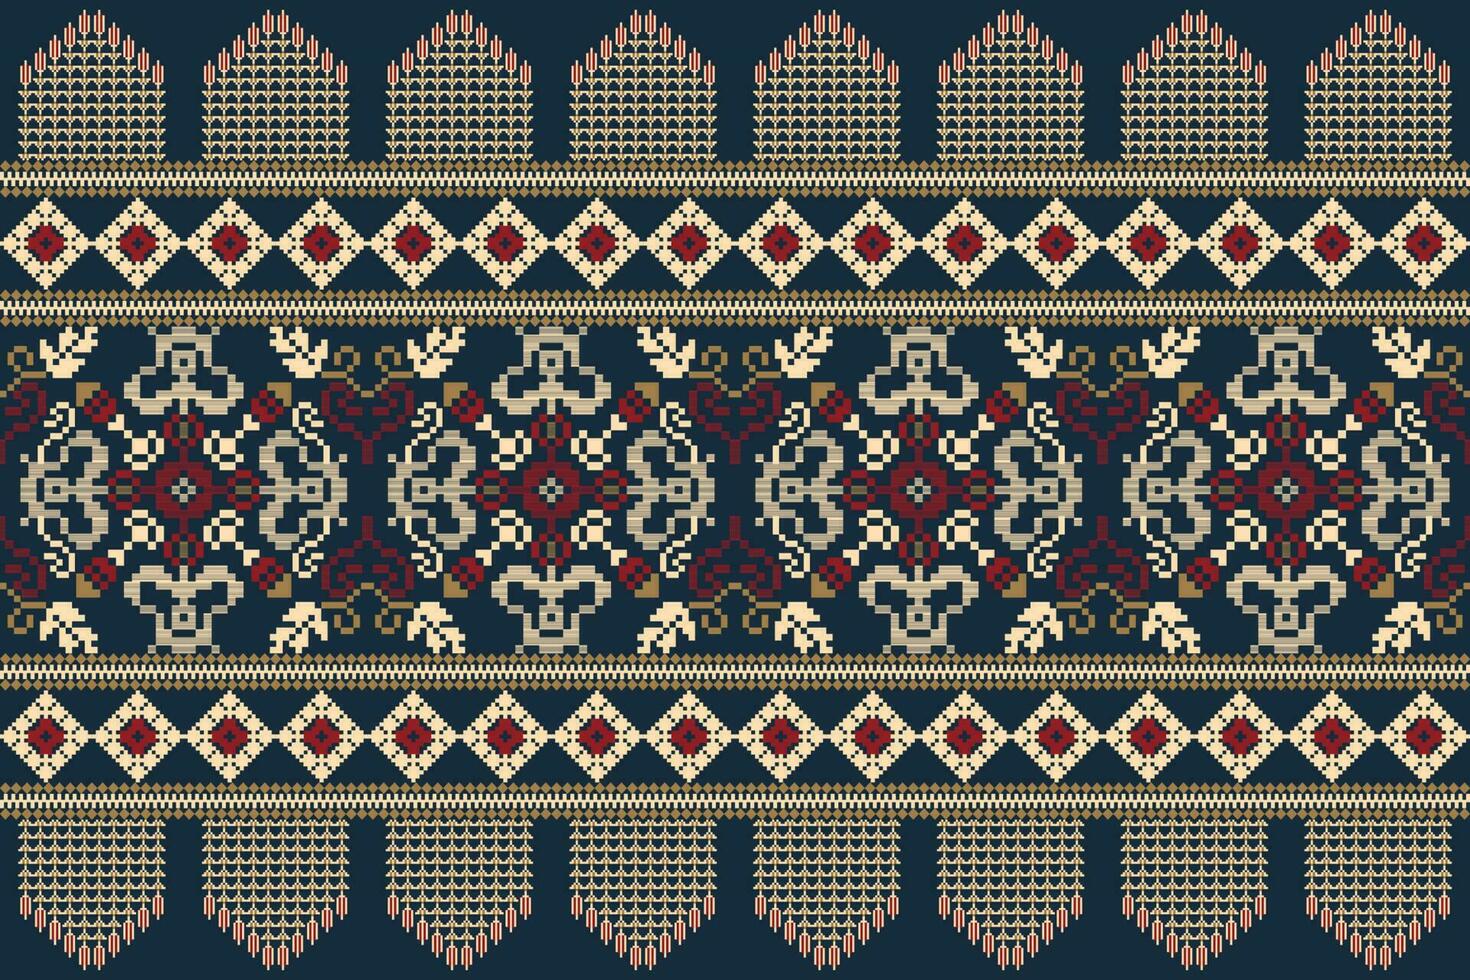 Floral knitted embroidery on navy blue background.geometric ethnic oriental pattern traditional.Aztec style abstract vector illustration.design for texture,fabric,clothing,wrapping,decoration,scarf.